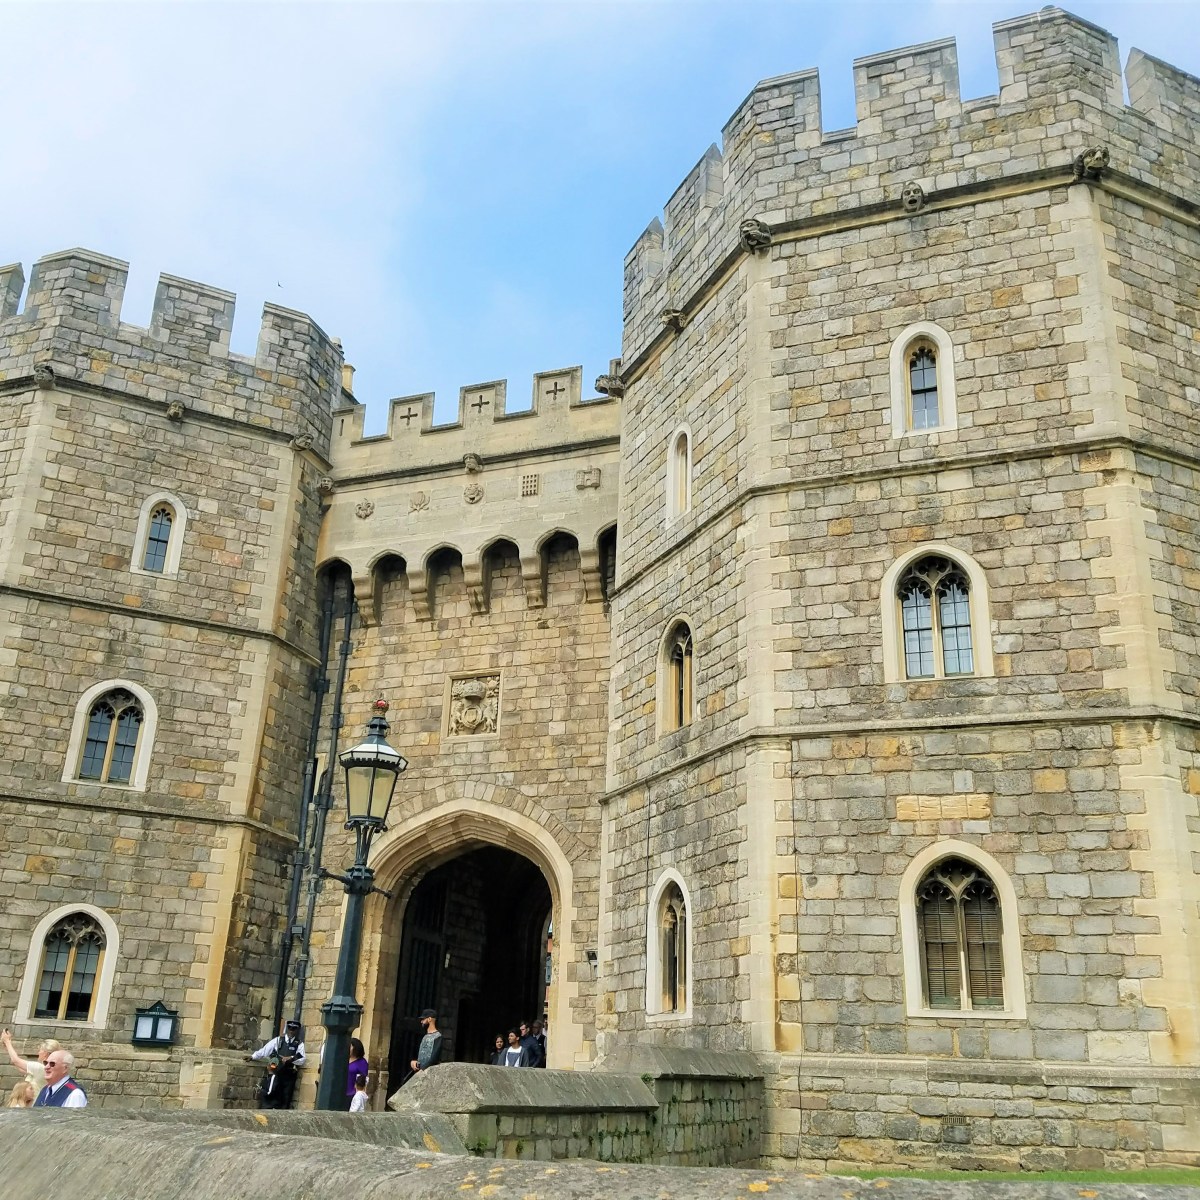 Day Trip to Windsor from London